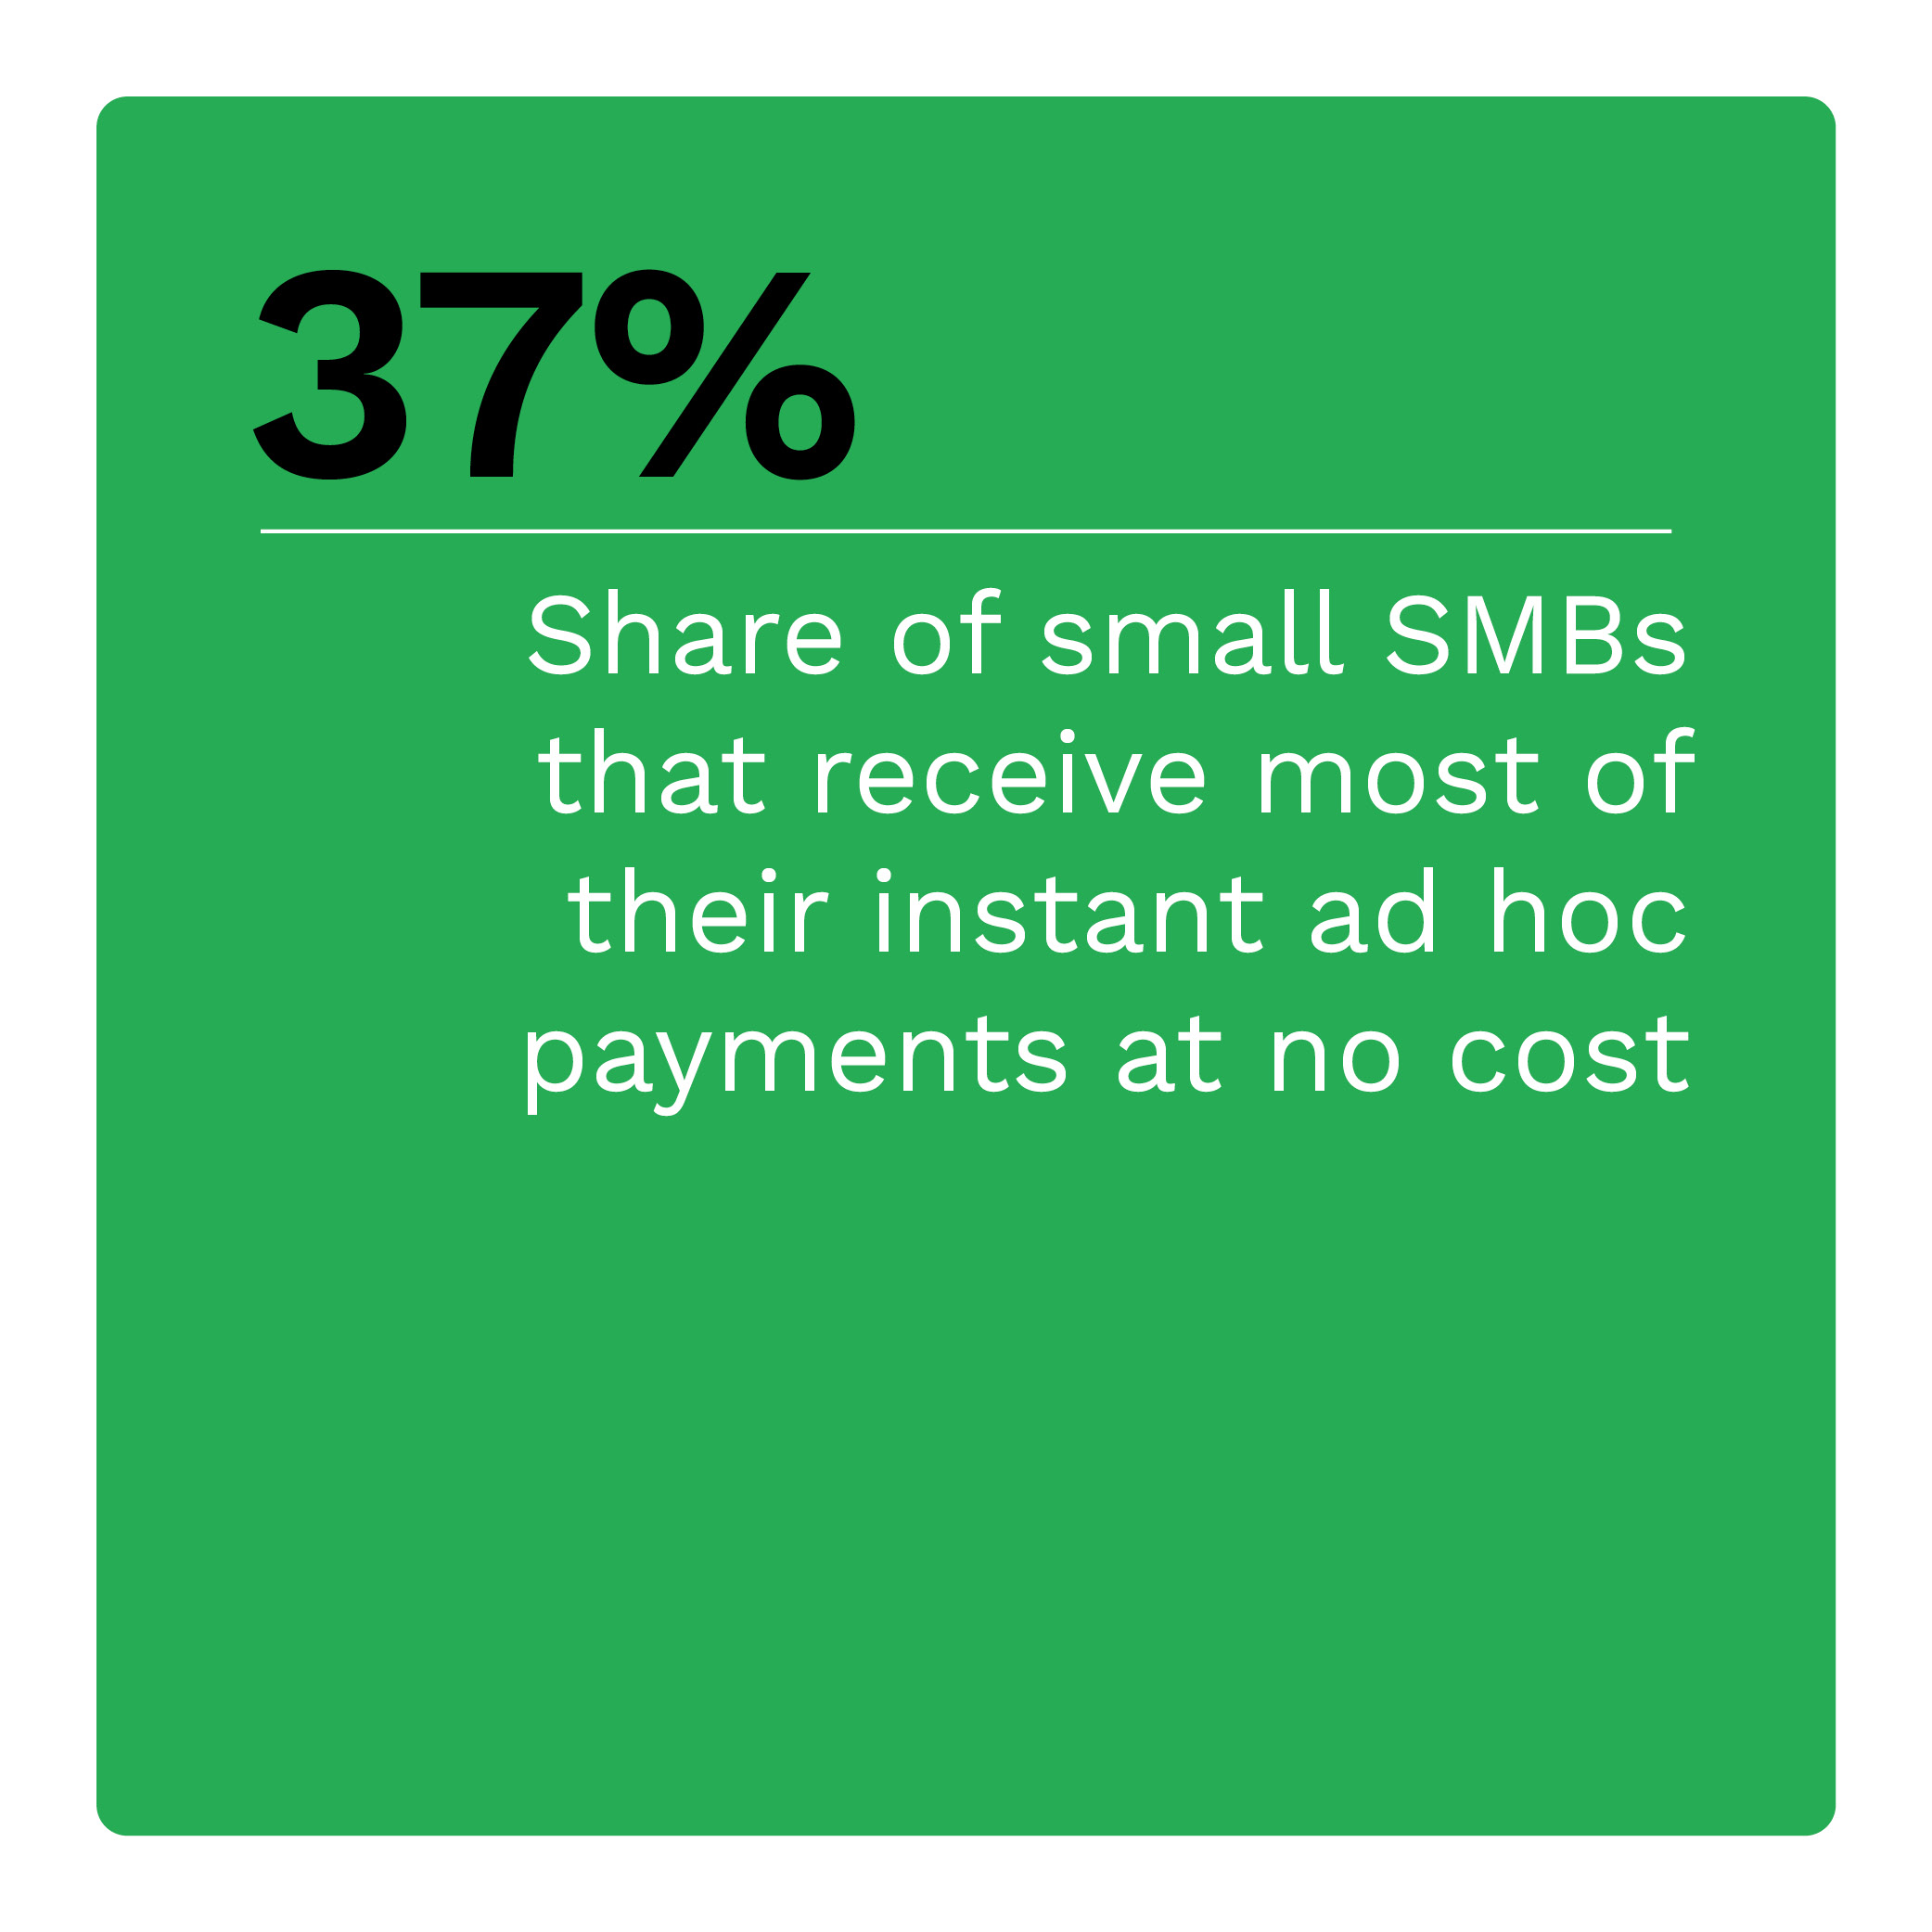  Share of small SMBs that receive most of their instant ad hoc payments at no cost